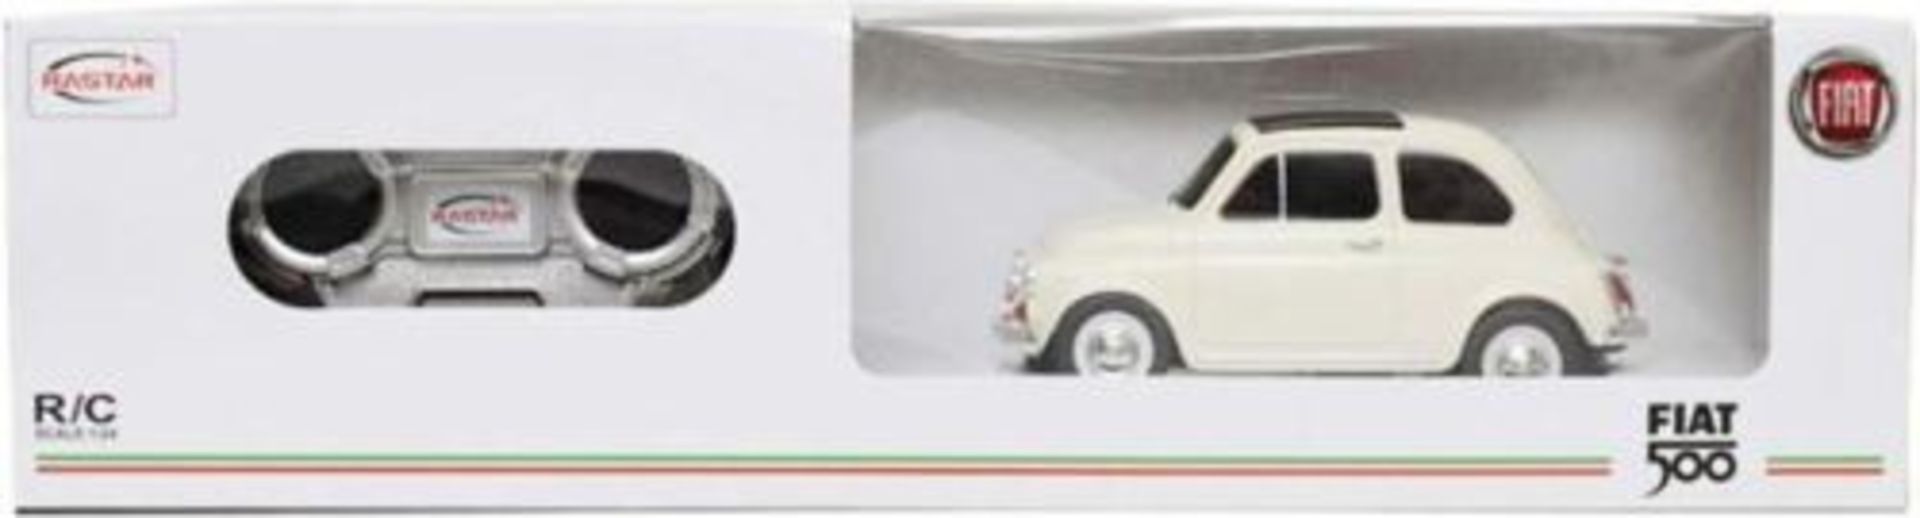 V Brand New 1:24 Scale Radio Control Fiat 500 - Fully Licensed X 2 YOUR BID PRICE TO BE MULTIPLIED